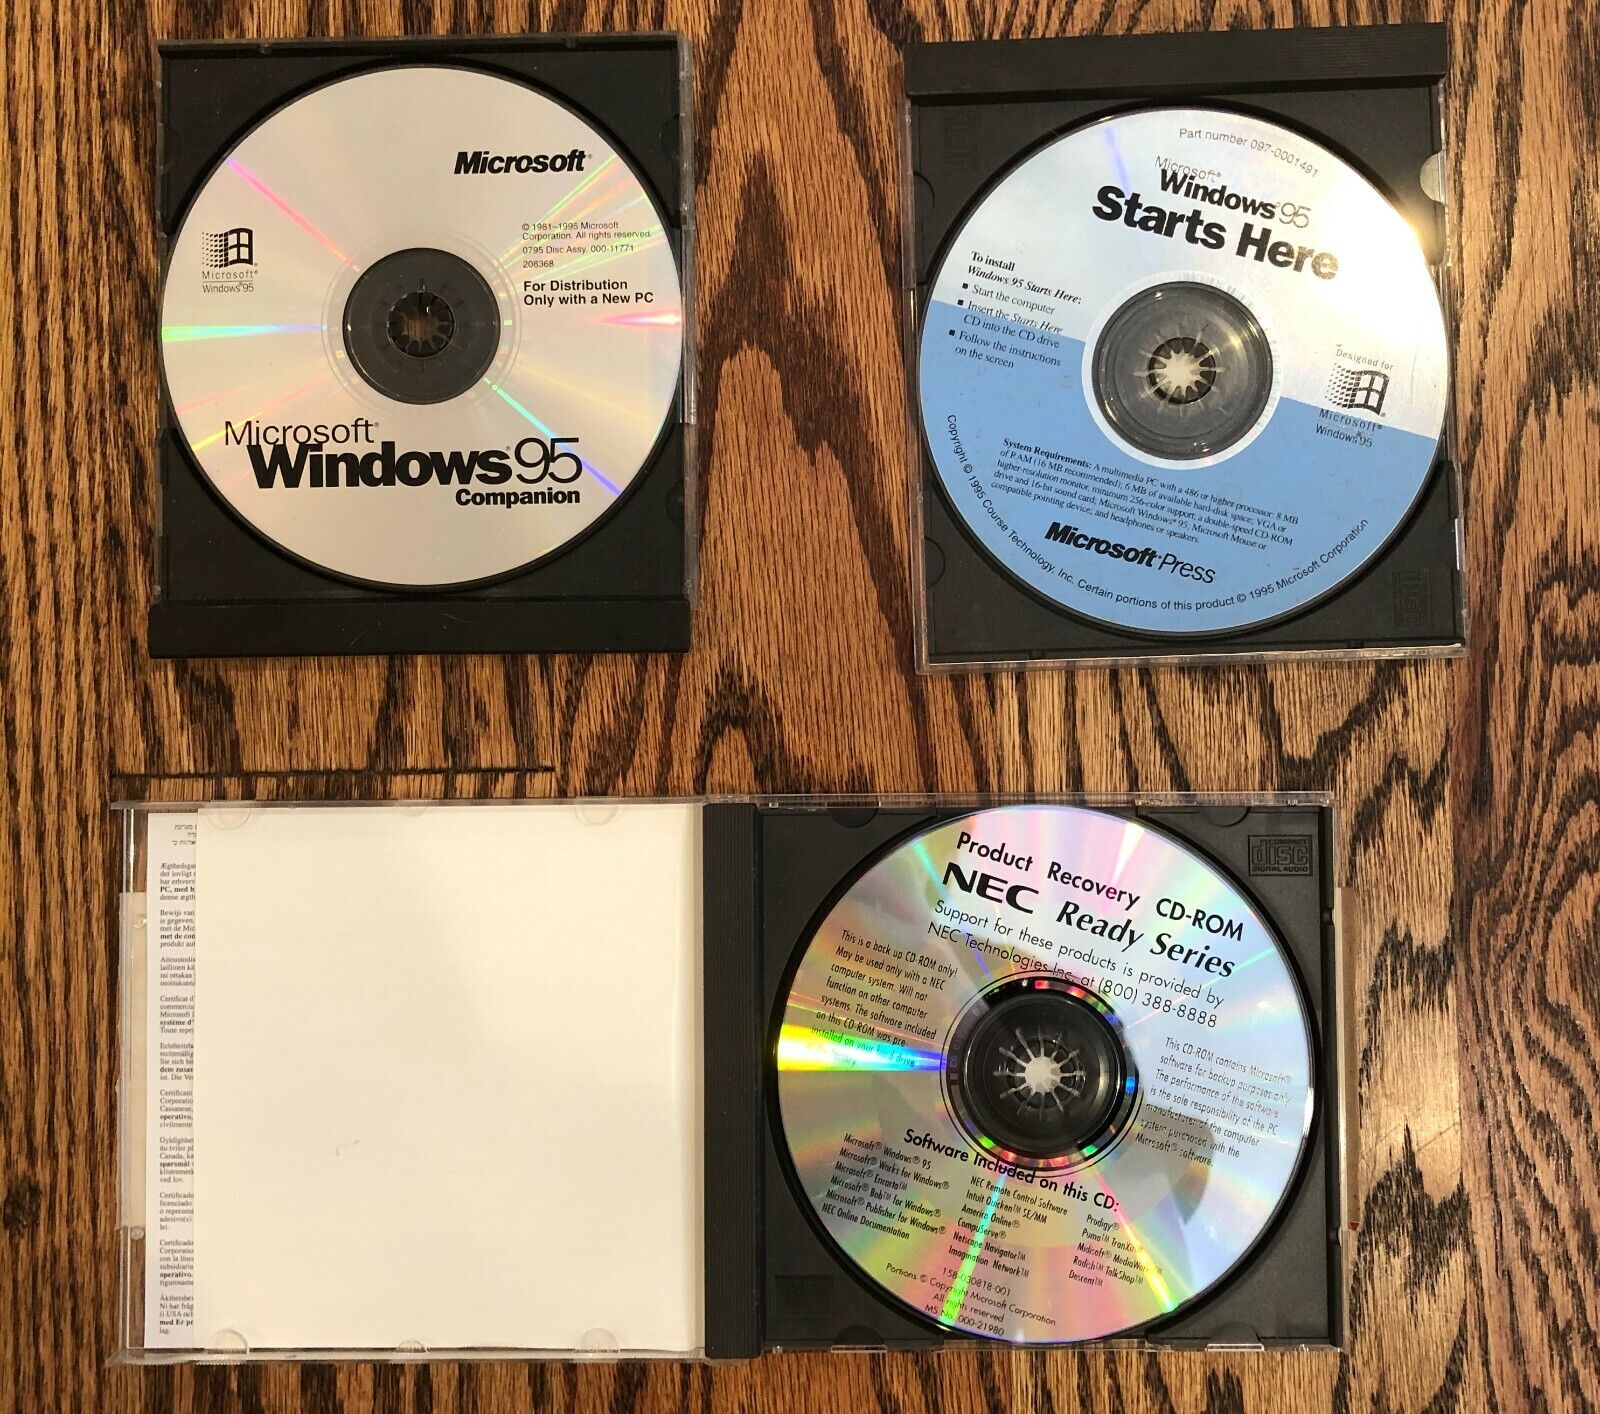 Microsoft Windows 95 Companion, starts here, product recovery cd Disc